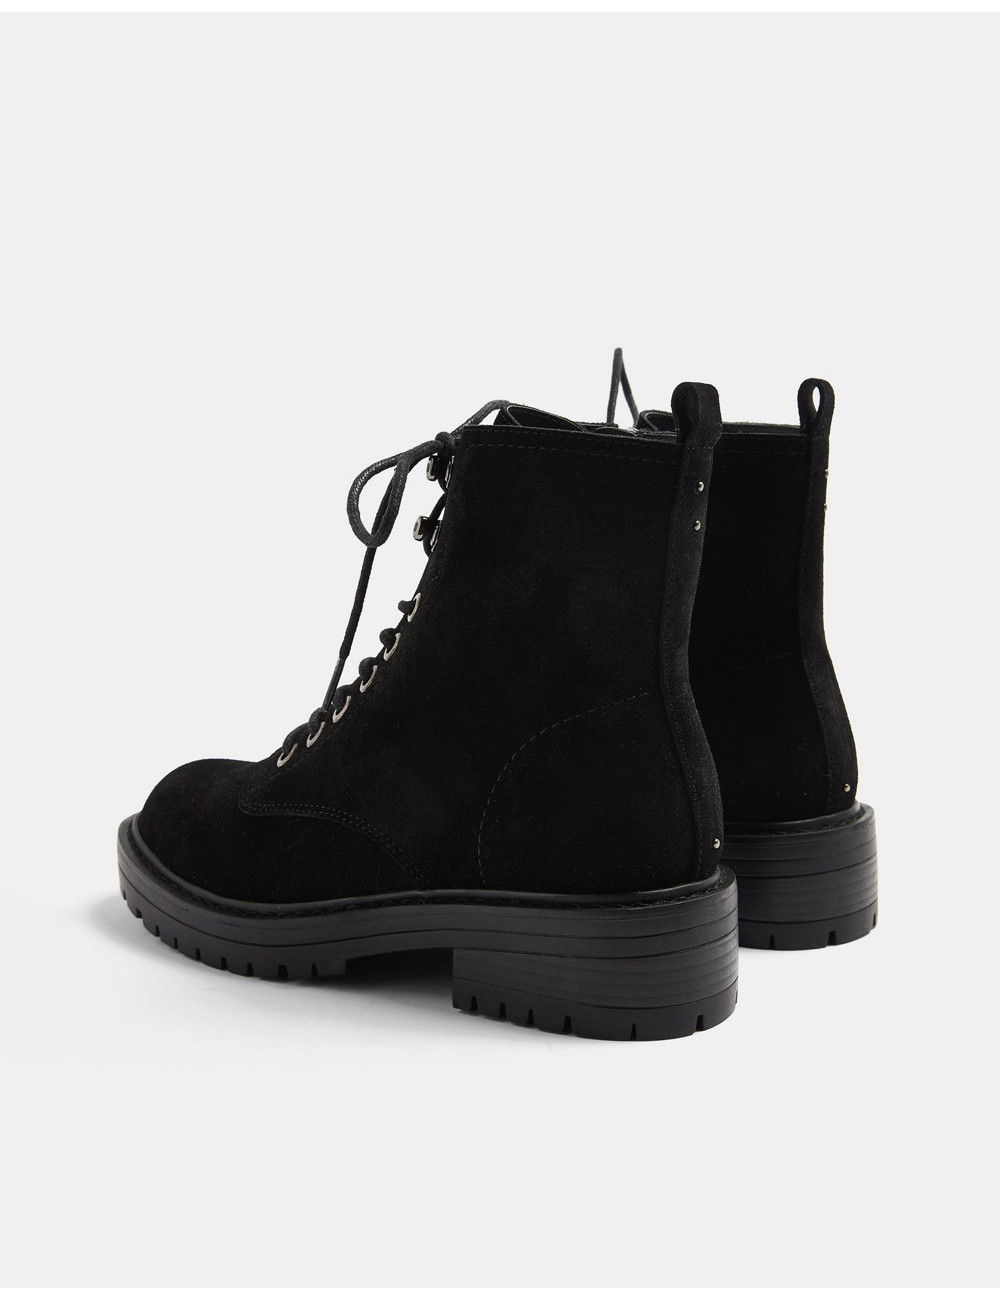 Topshop suede lace up boots...